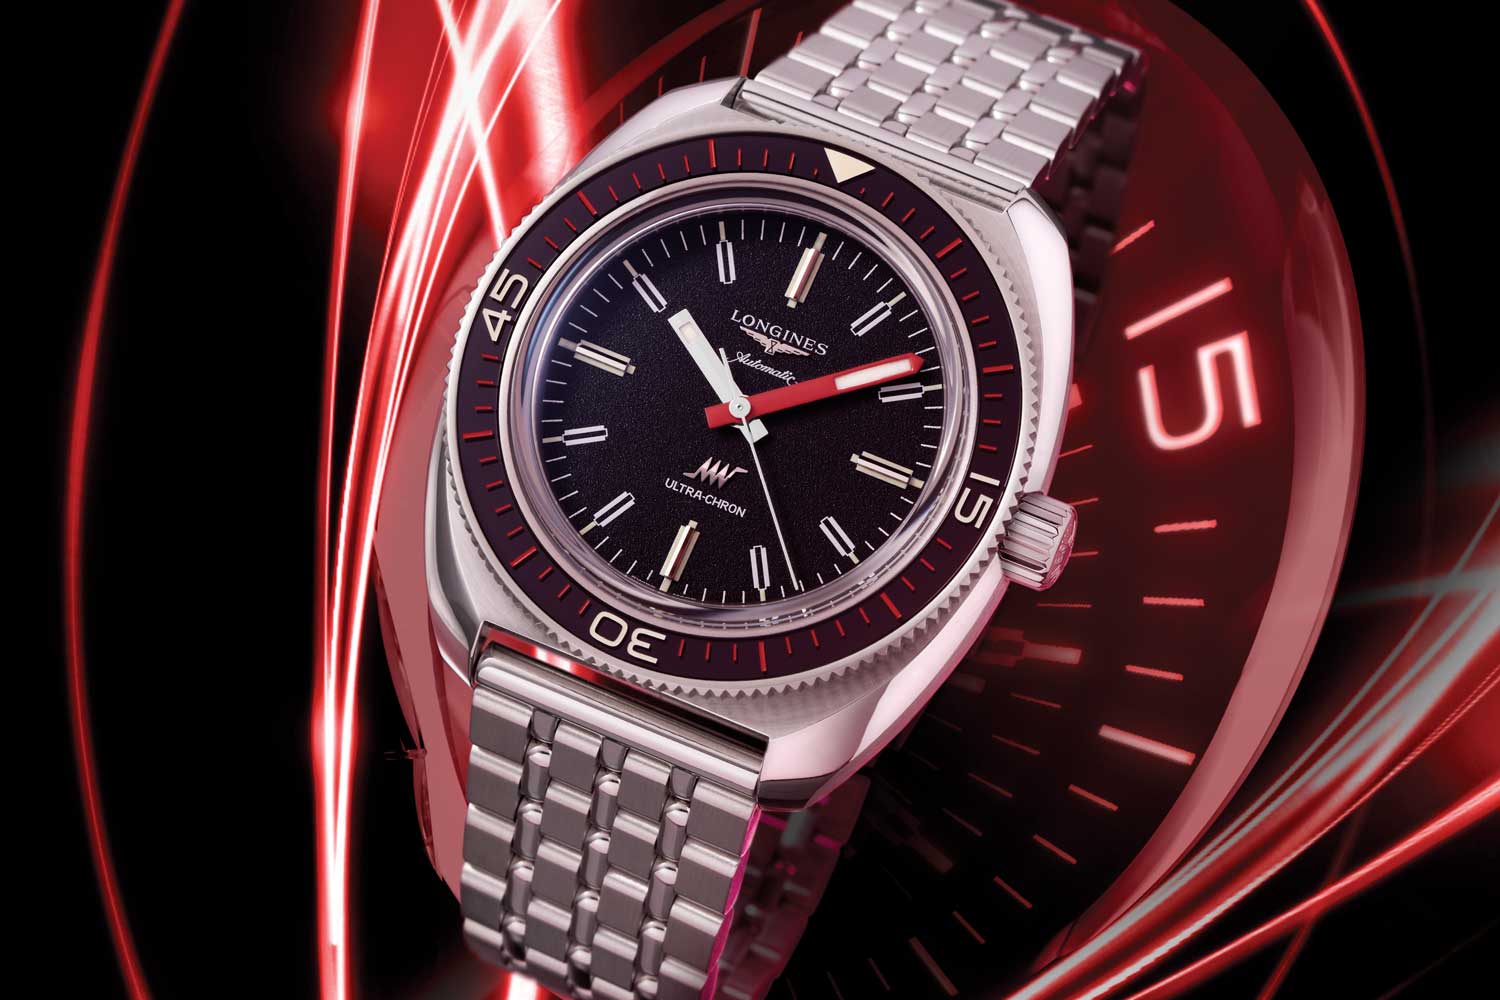 Stylistically, the 2022 Longines Ultra-Chron draws inspiration from the historical Ultra-Chron high-beat Diver of 1968